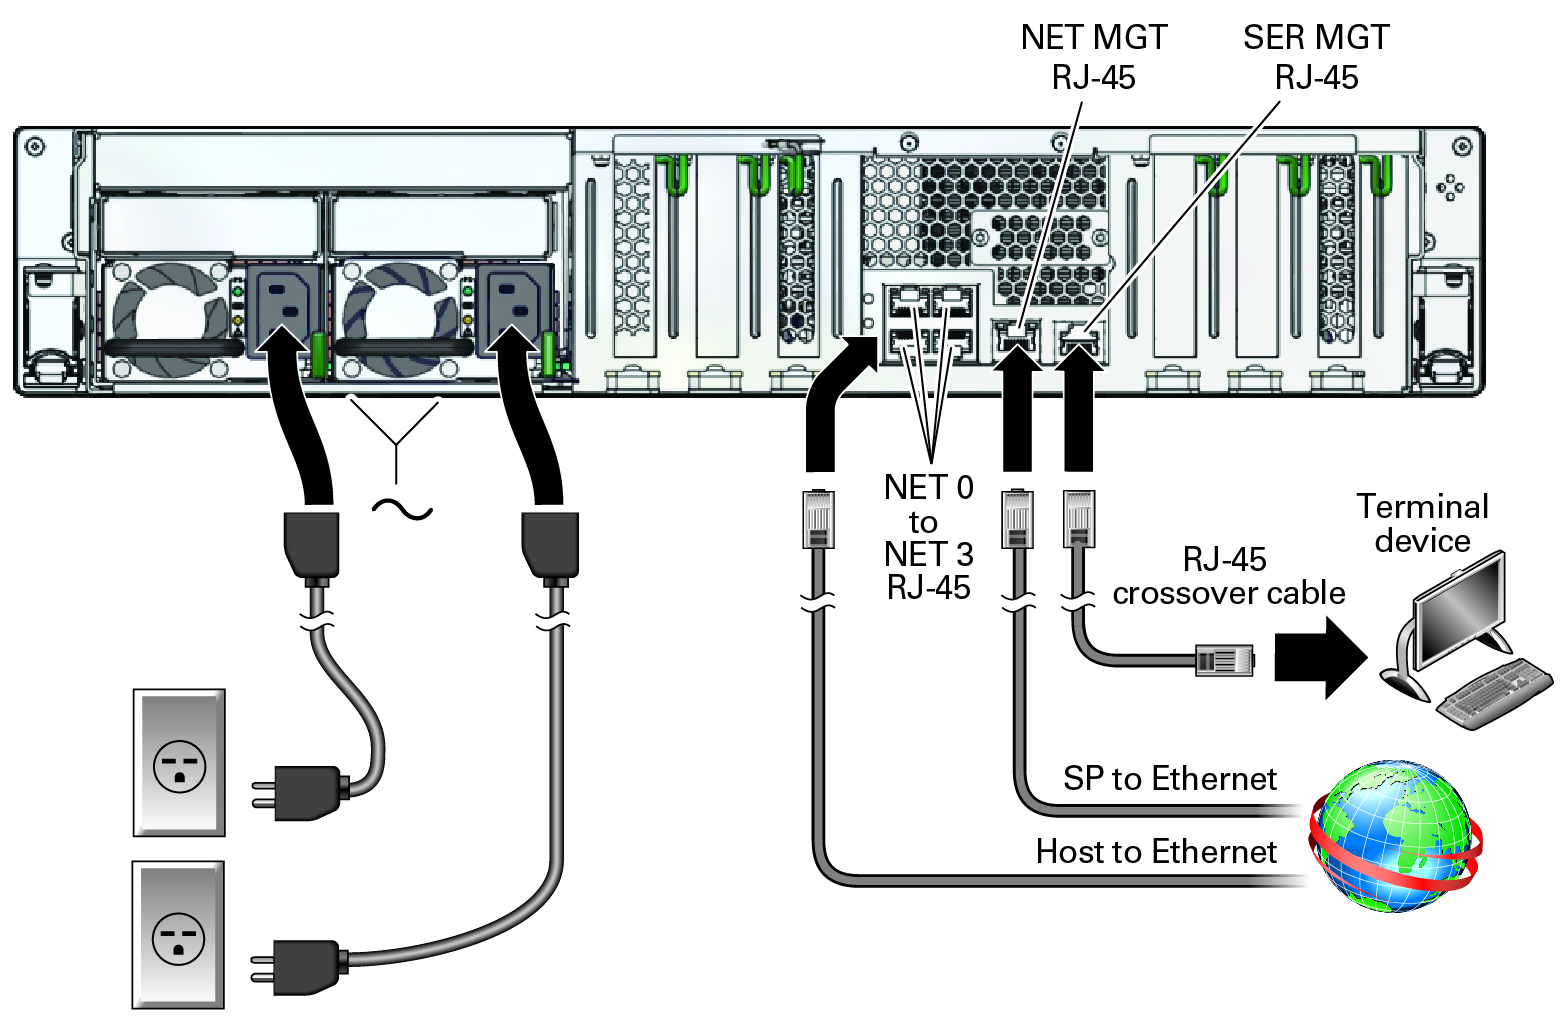 image:Image showing cables connecting to the                                                   rear of the server.